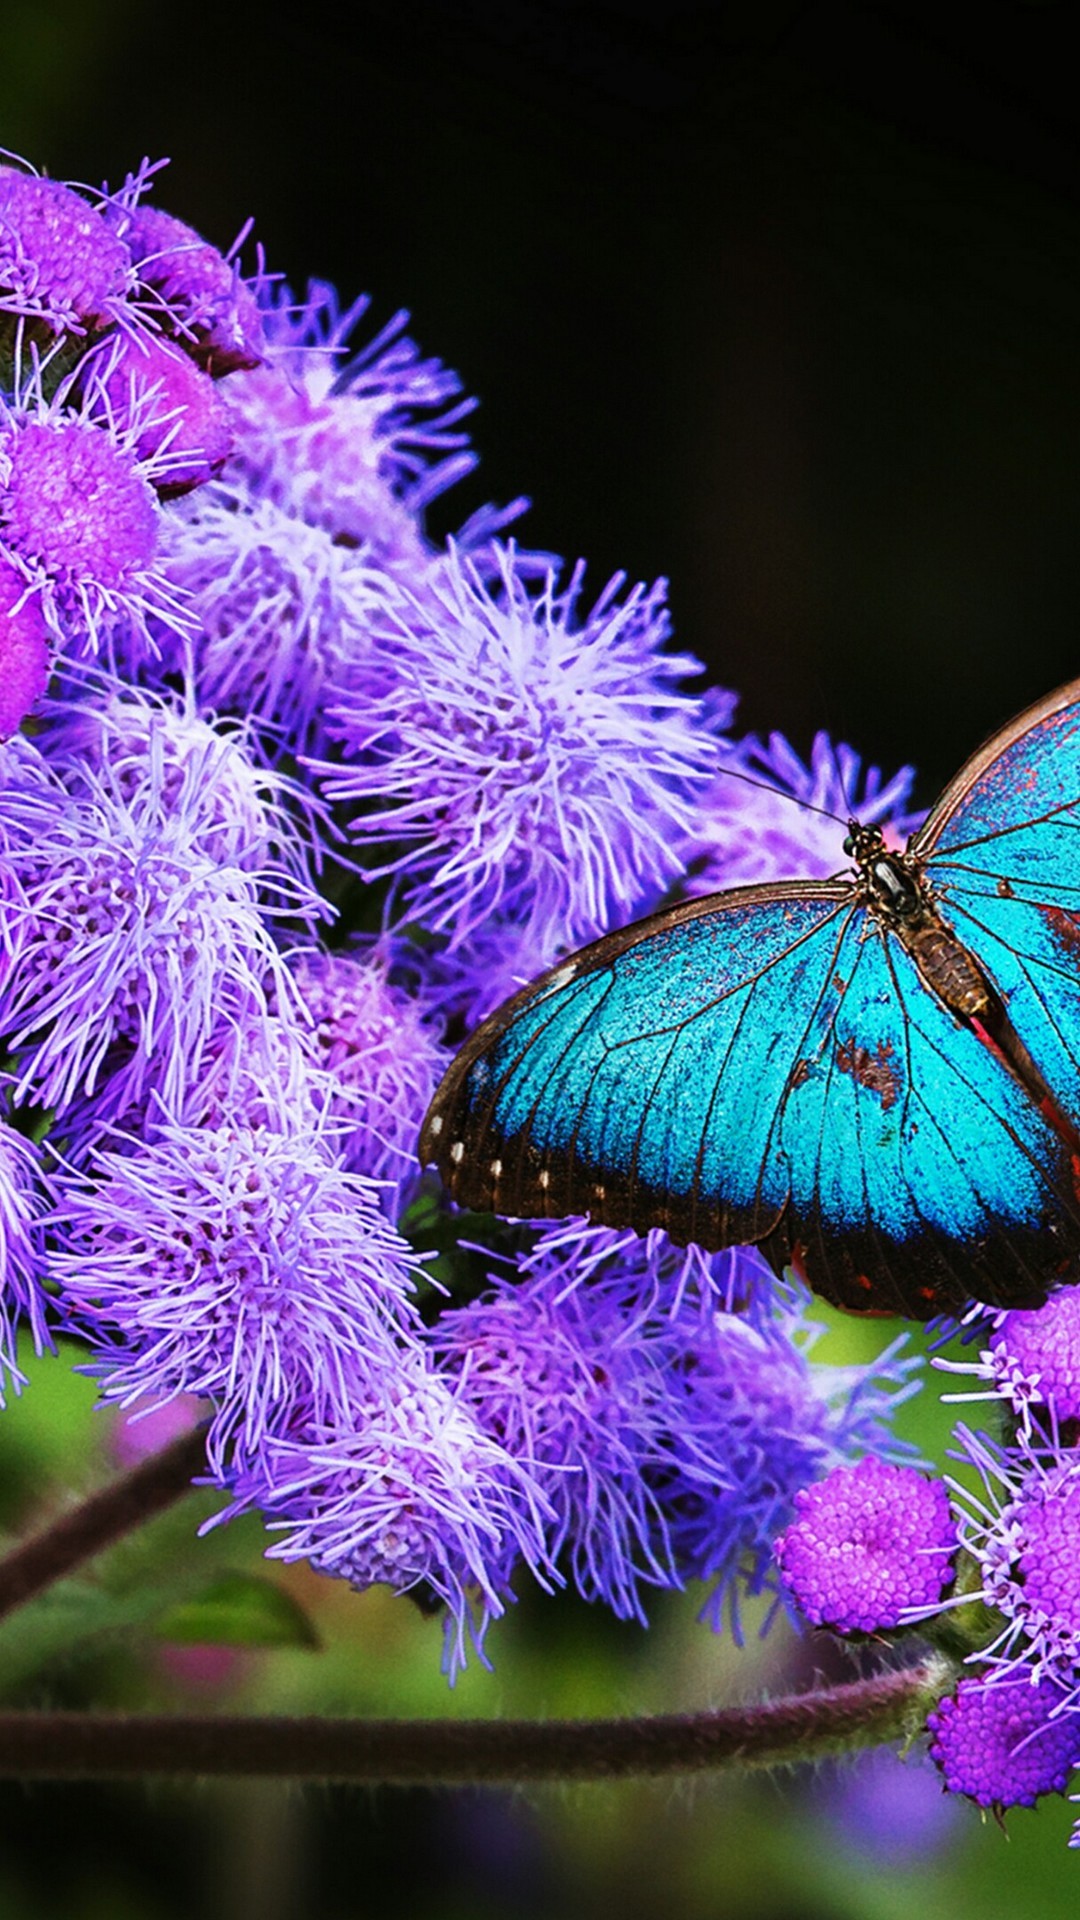 Wallpaper Blue Butterfly Android with HD resolution 1080x1920